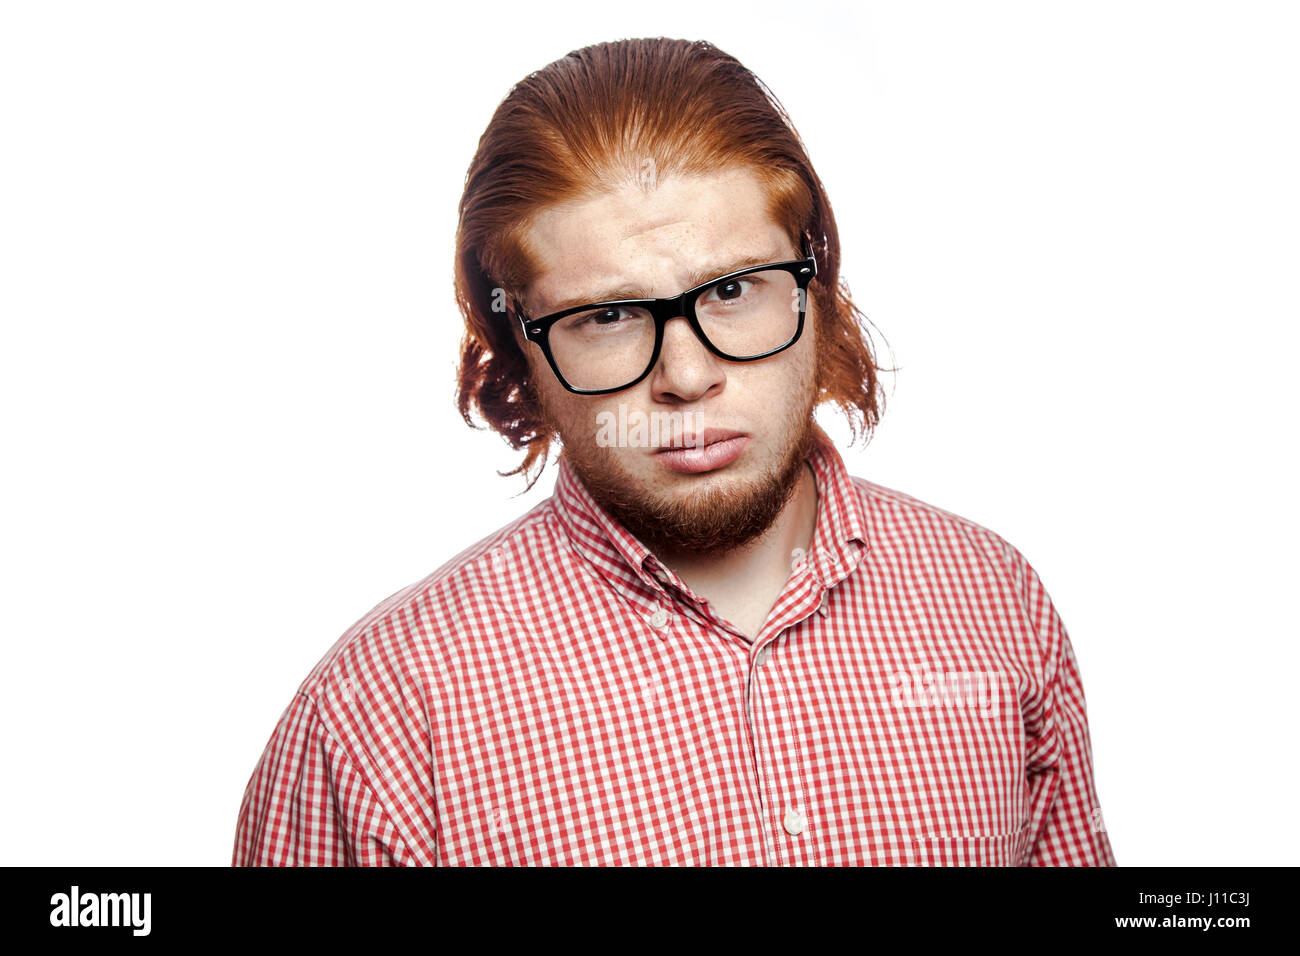 Sad unhappy bearded readhead businessman with red shirt and freckles and glasses looking at camera. studio shot isolated on white. Stock Photo